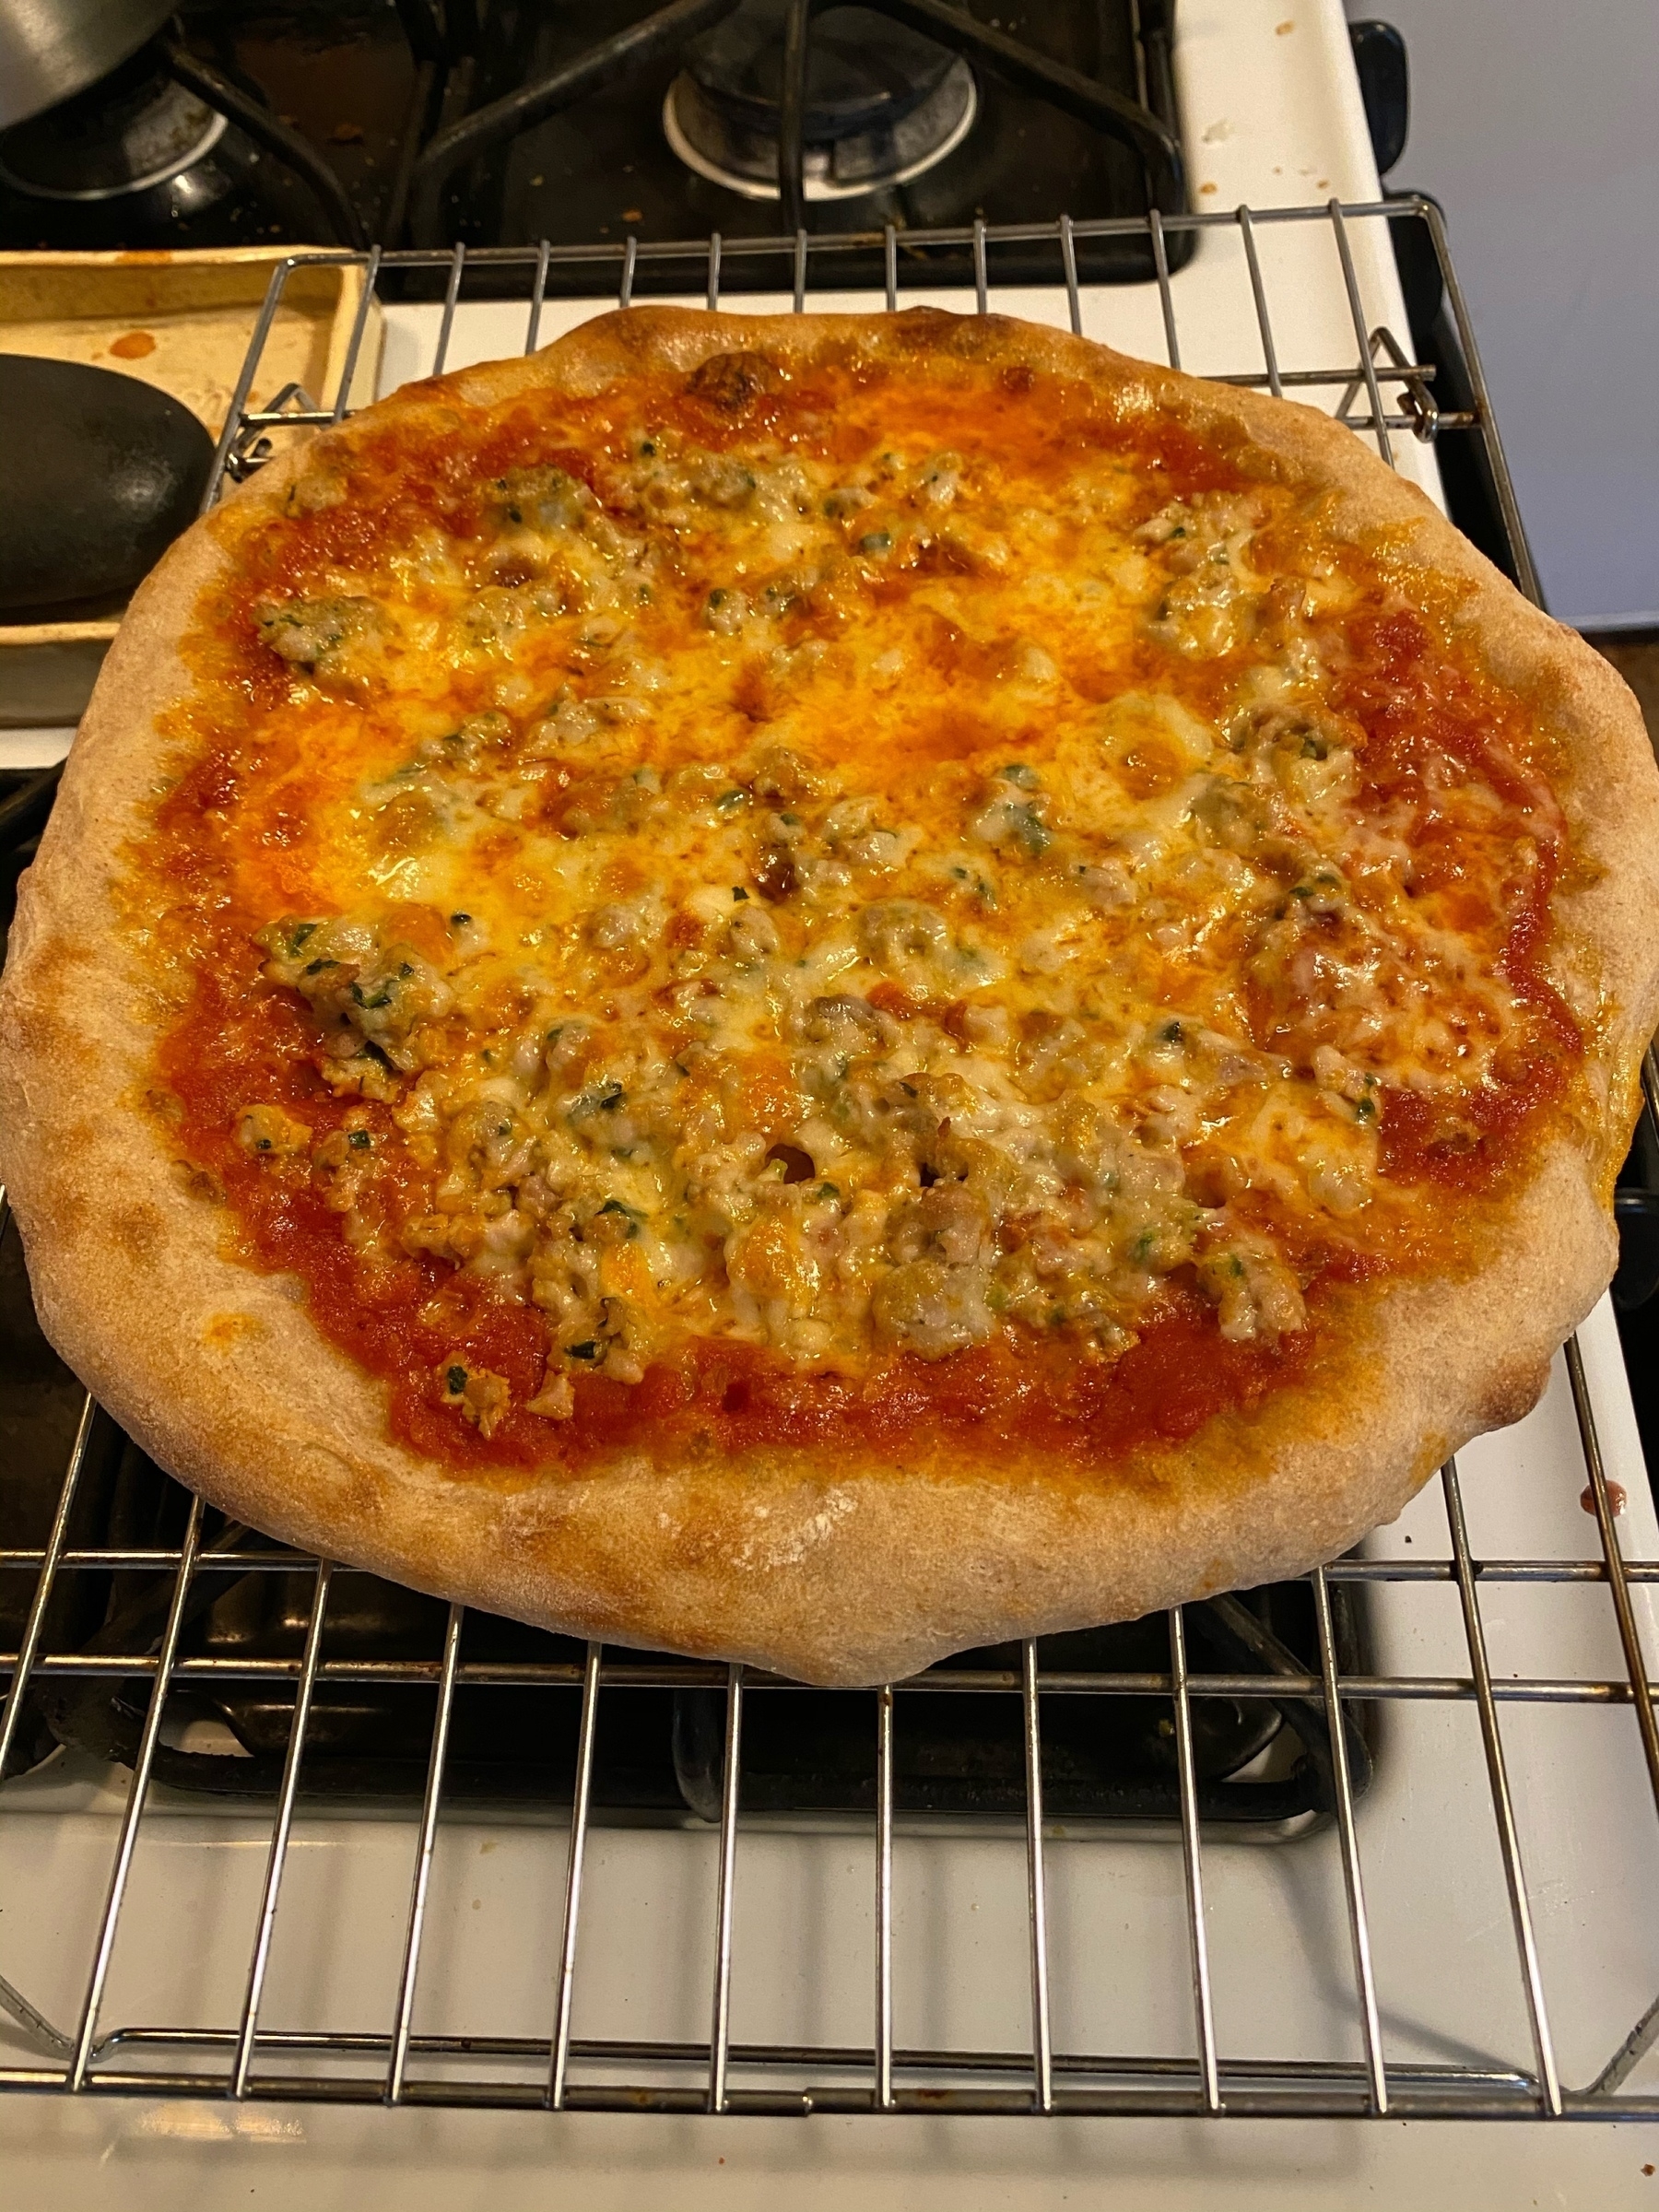 Yet another small pizza on a cooling rack.